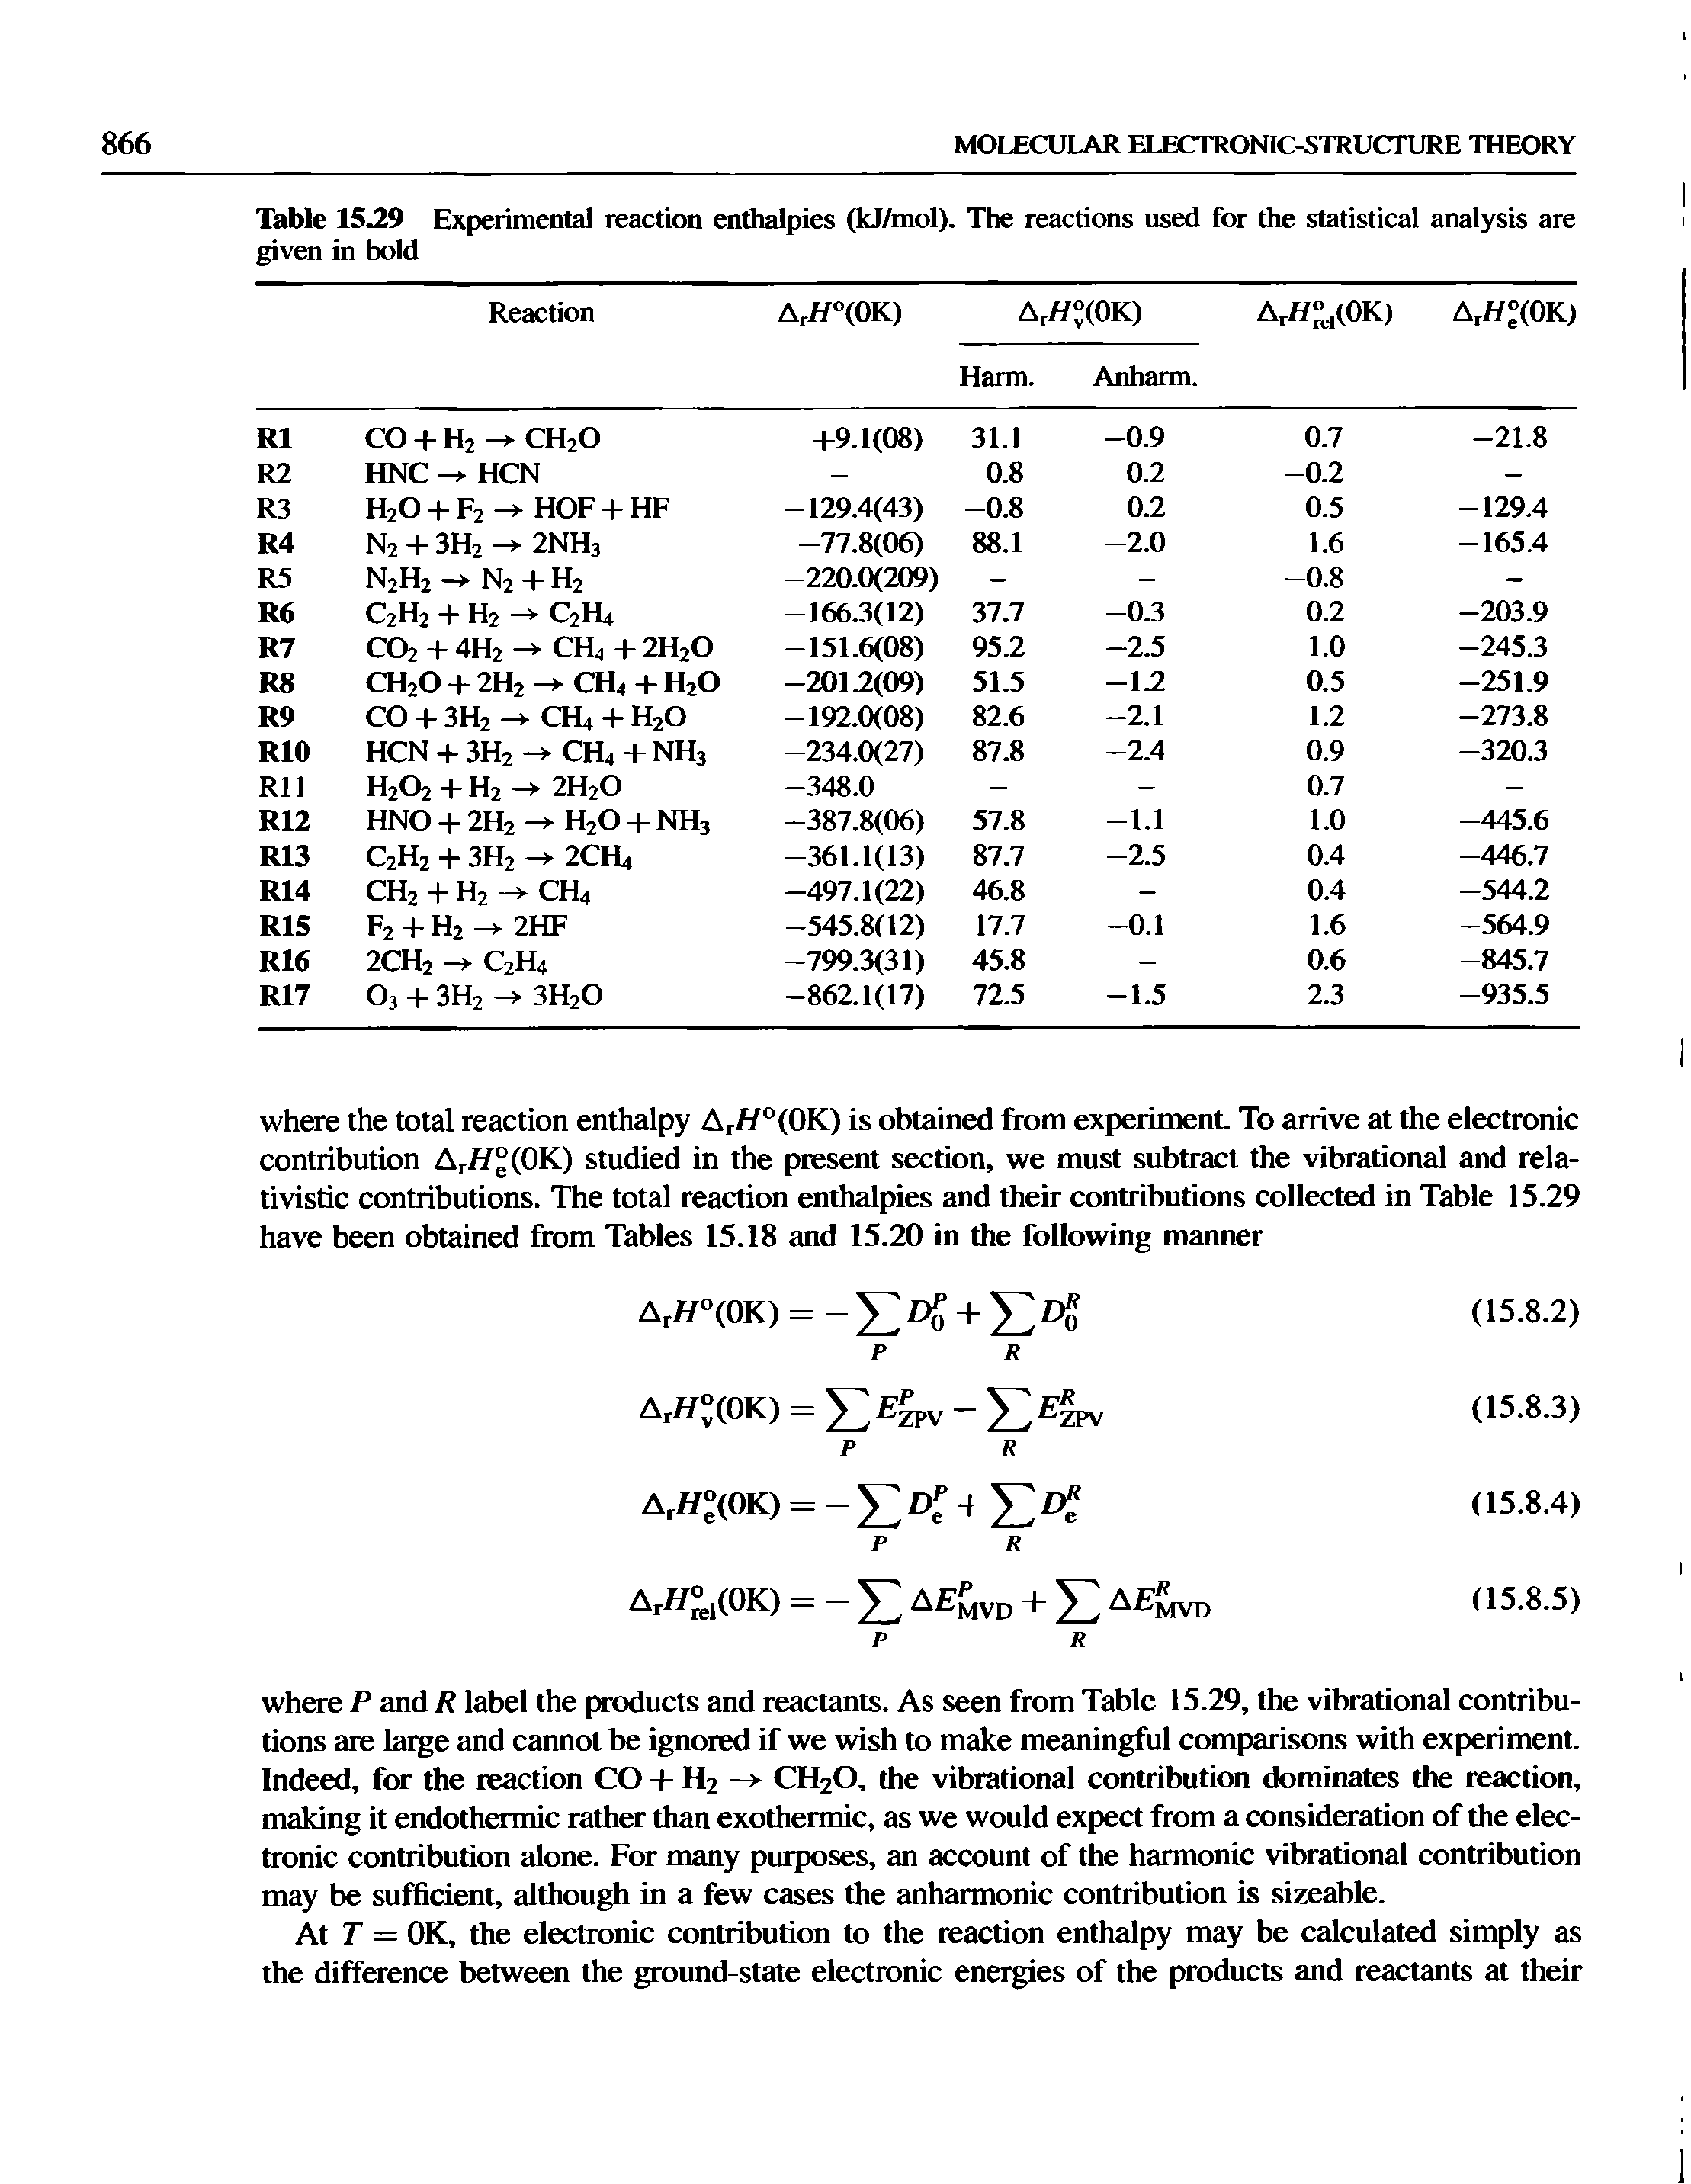 Table 15 9 Experimental reaction enthalpies (kJ/mol). The reactions used for the statistical analysis are given in bold...